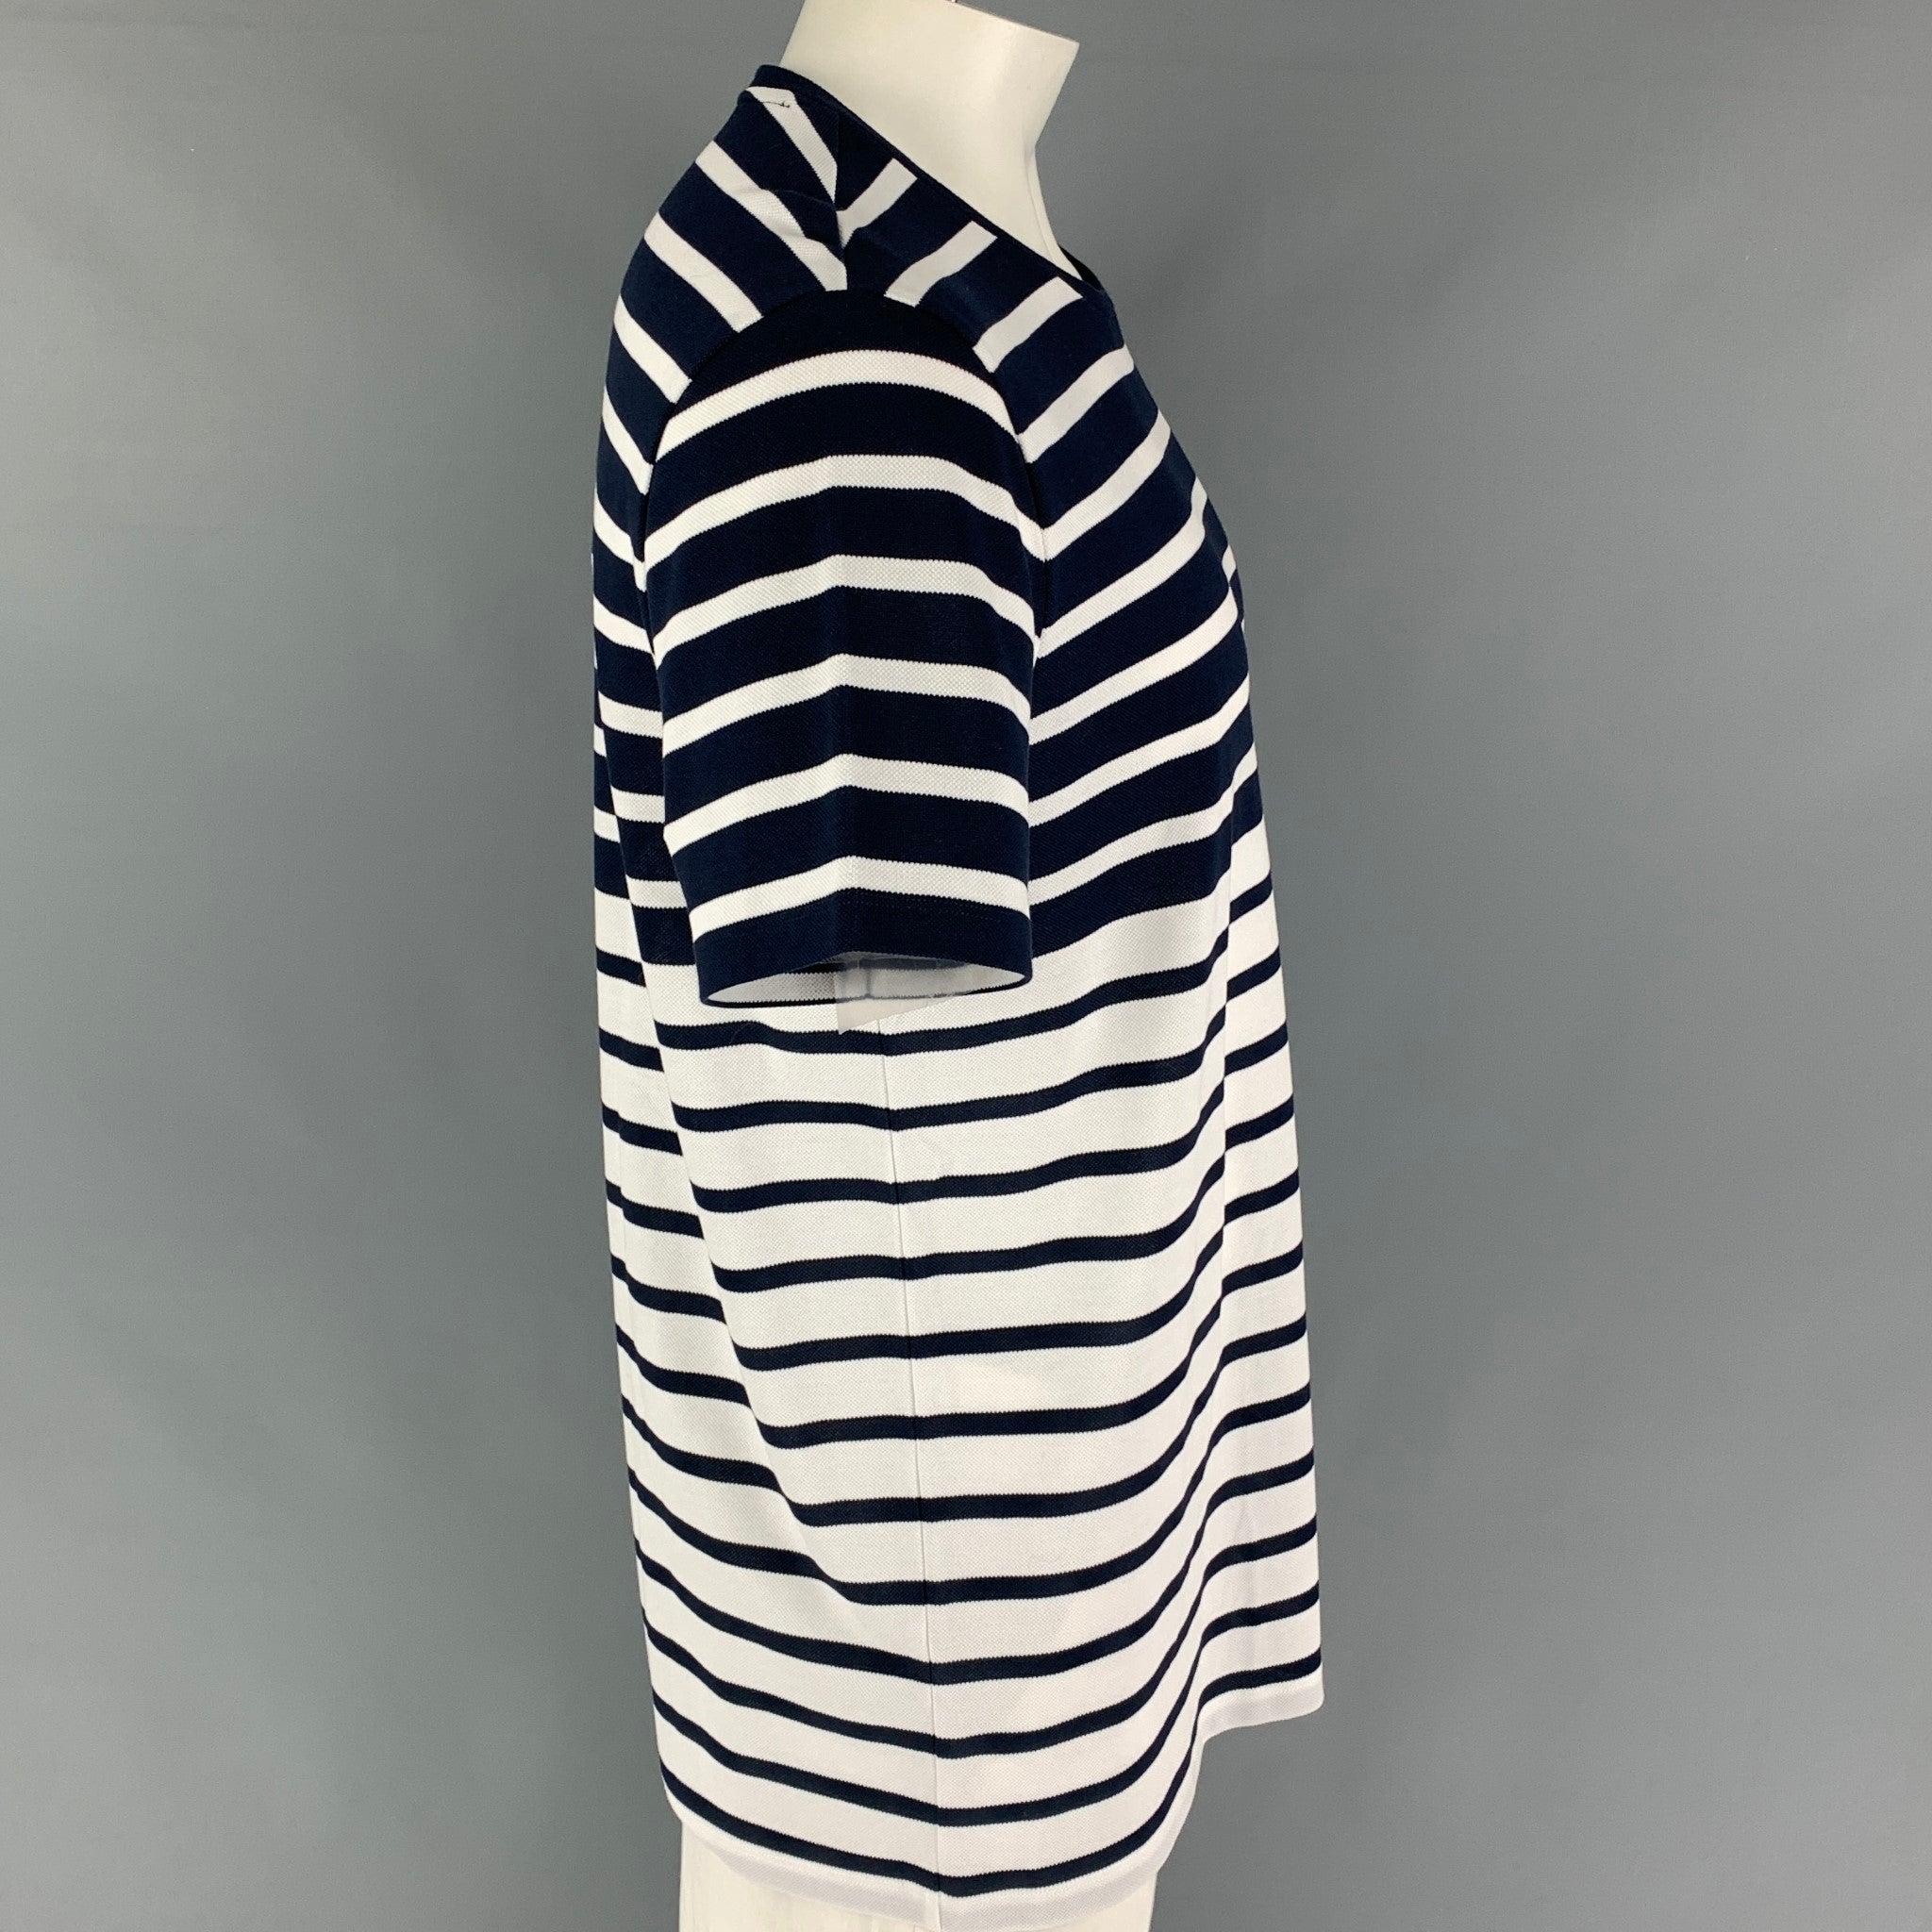 BOSS by HUGO BOSS t-shirt comes in a navy & white stripe cotton featuring a regular fit and a crew-neck.
Excellent
Pre-Owned Condition. 

Marked:   XXL  

Measurements: 
 
Shoulder: 19.5 inches Chest: 42 inches Sleeve: 9.5 inches Length: 31 inches 
